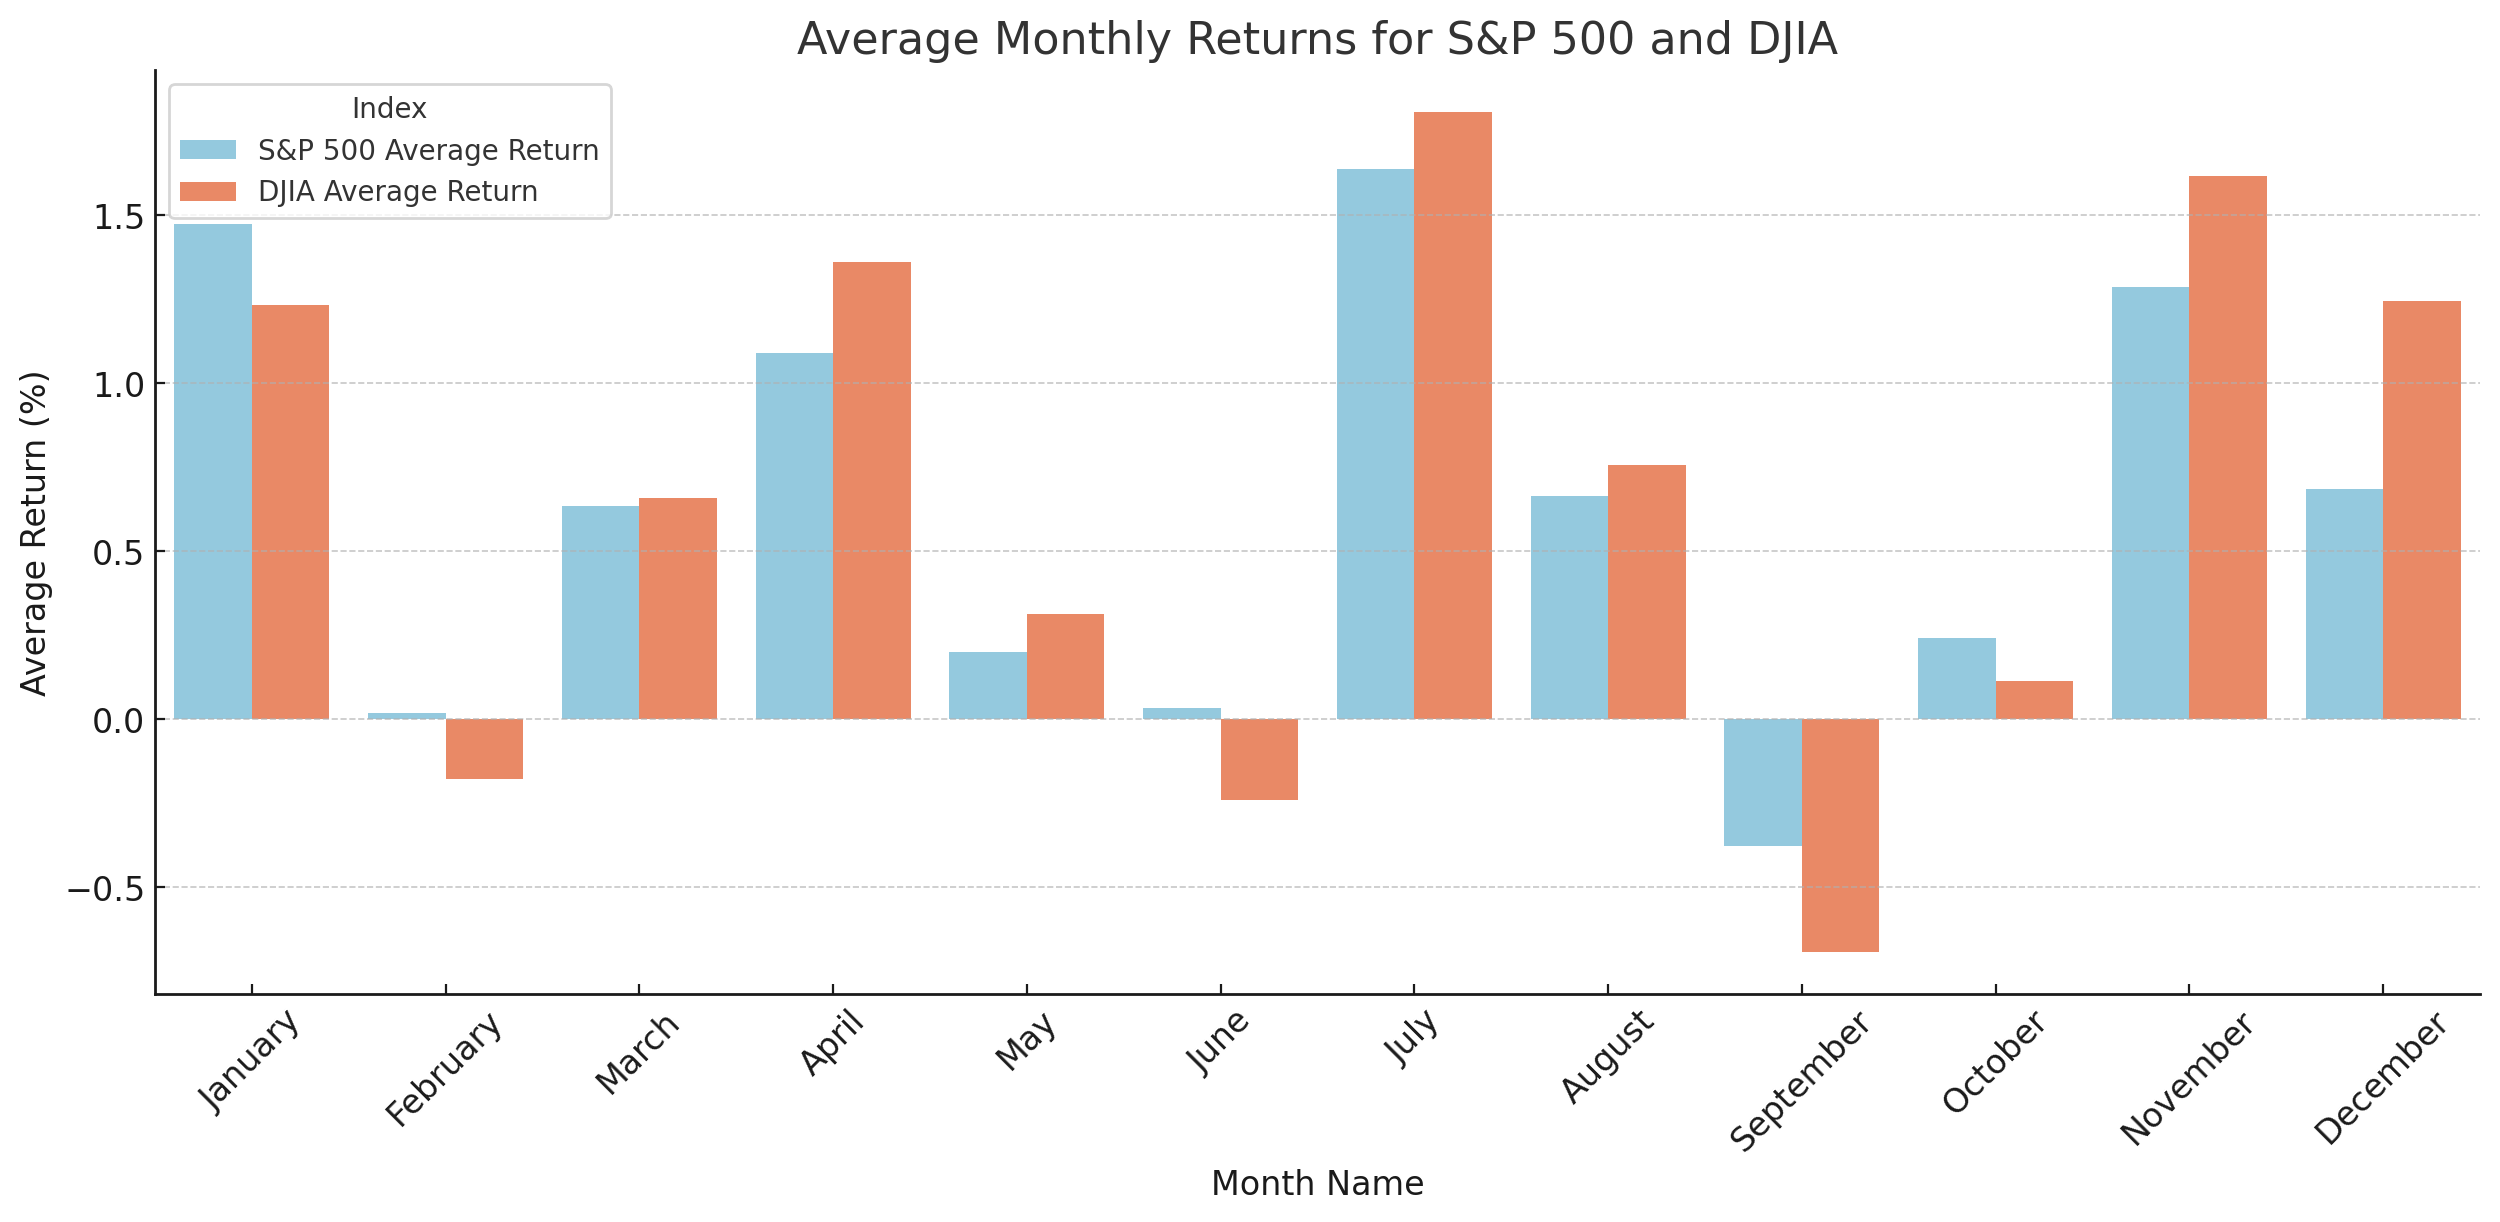 S&P 500 and DJIA-Average Monthly Returns